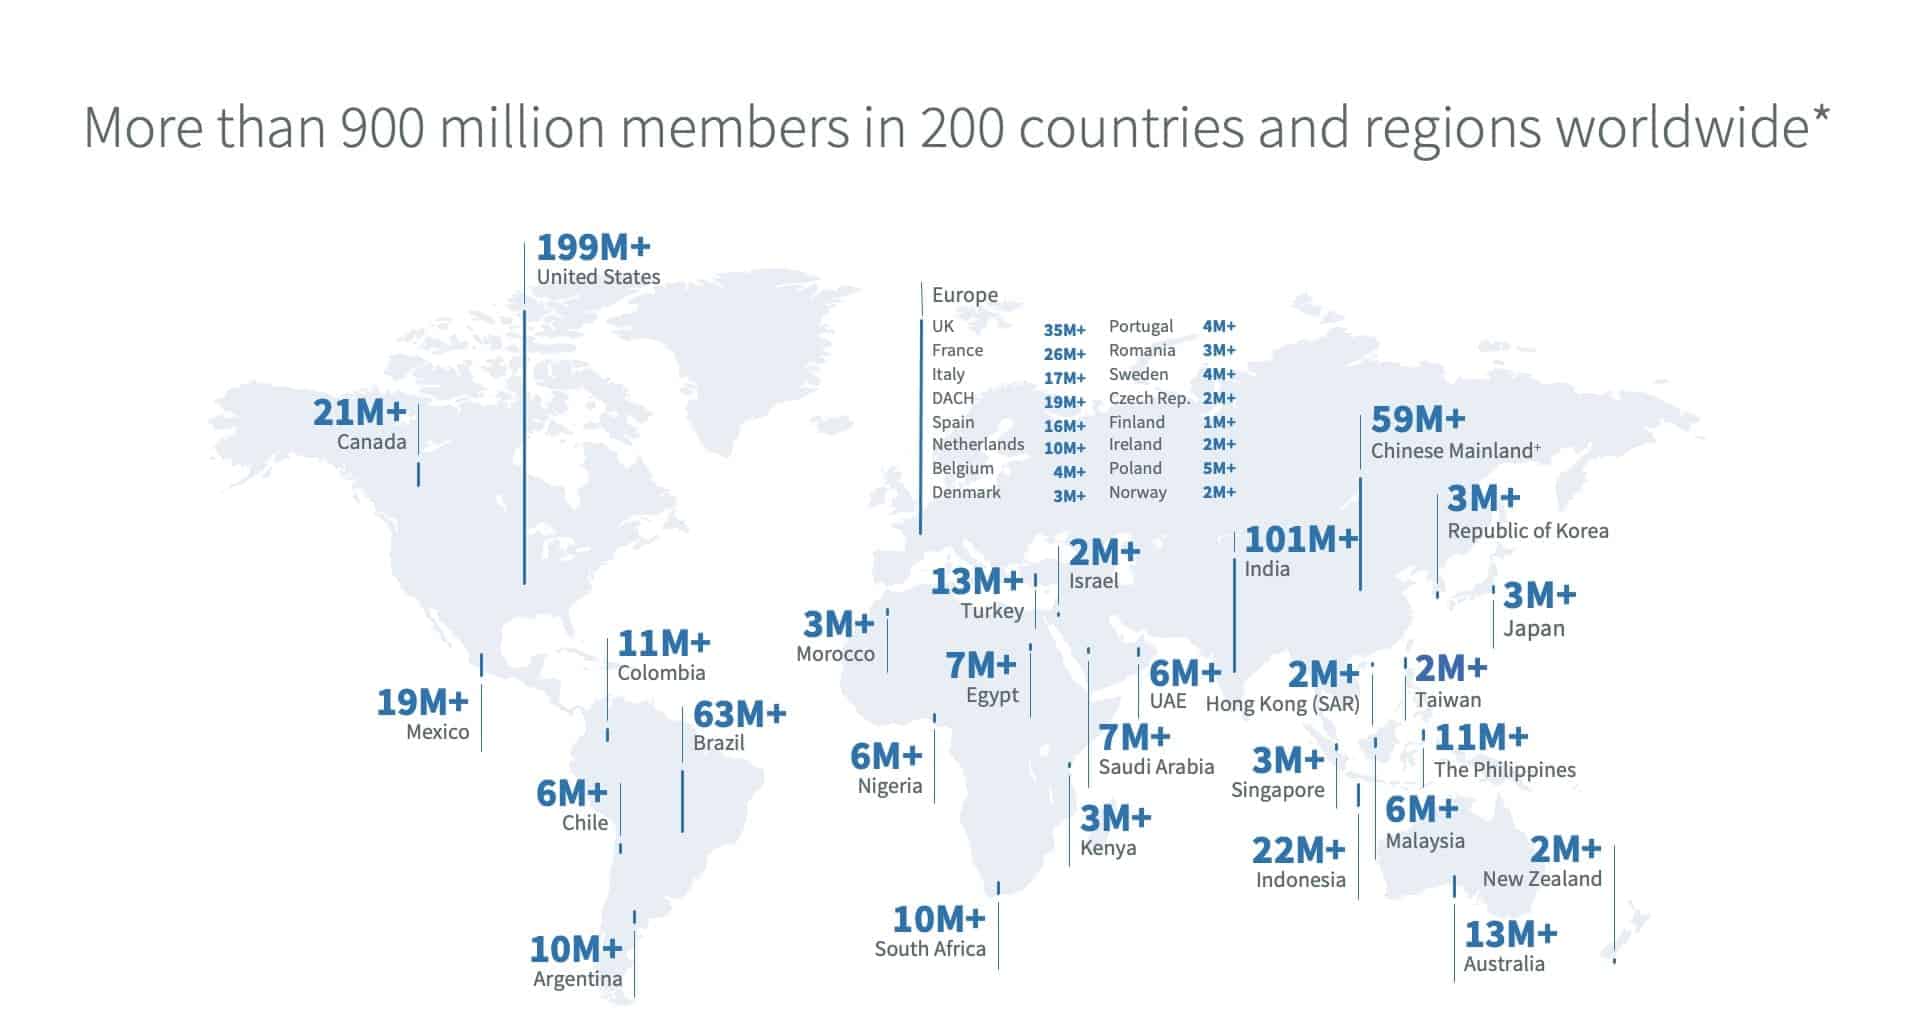 Country wise distribution of LinkedIn users